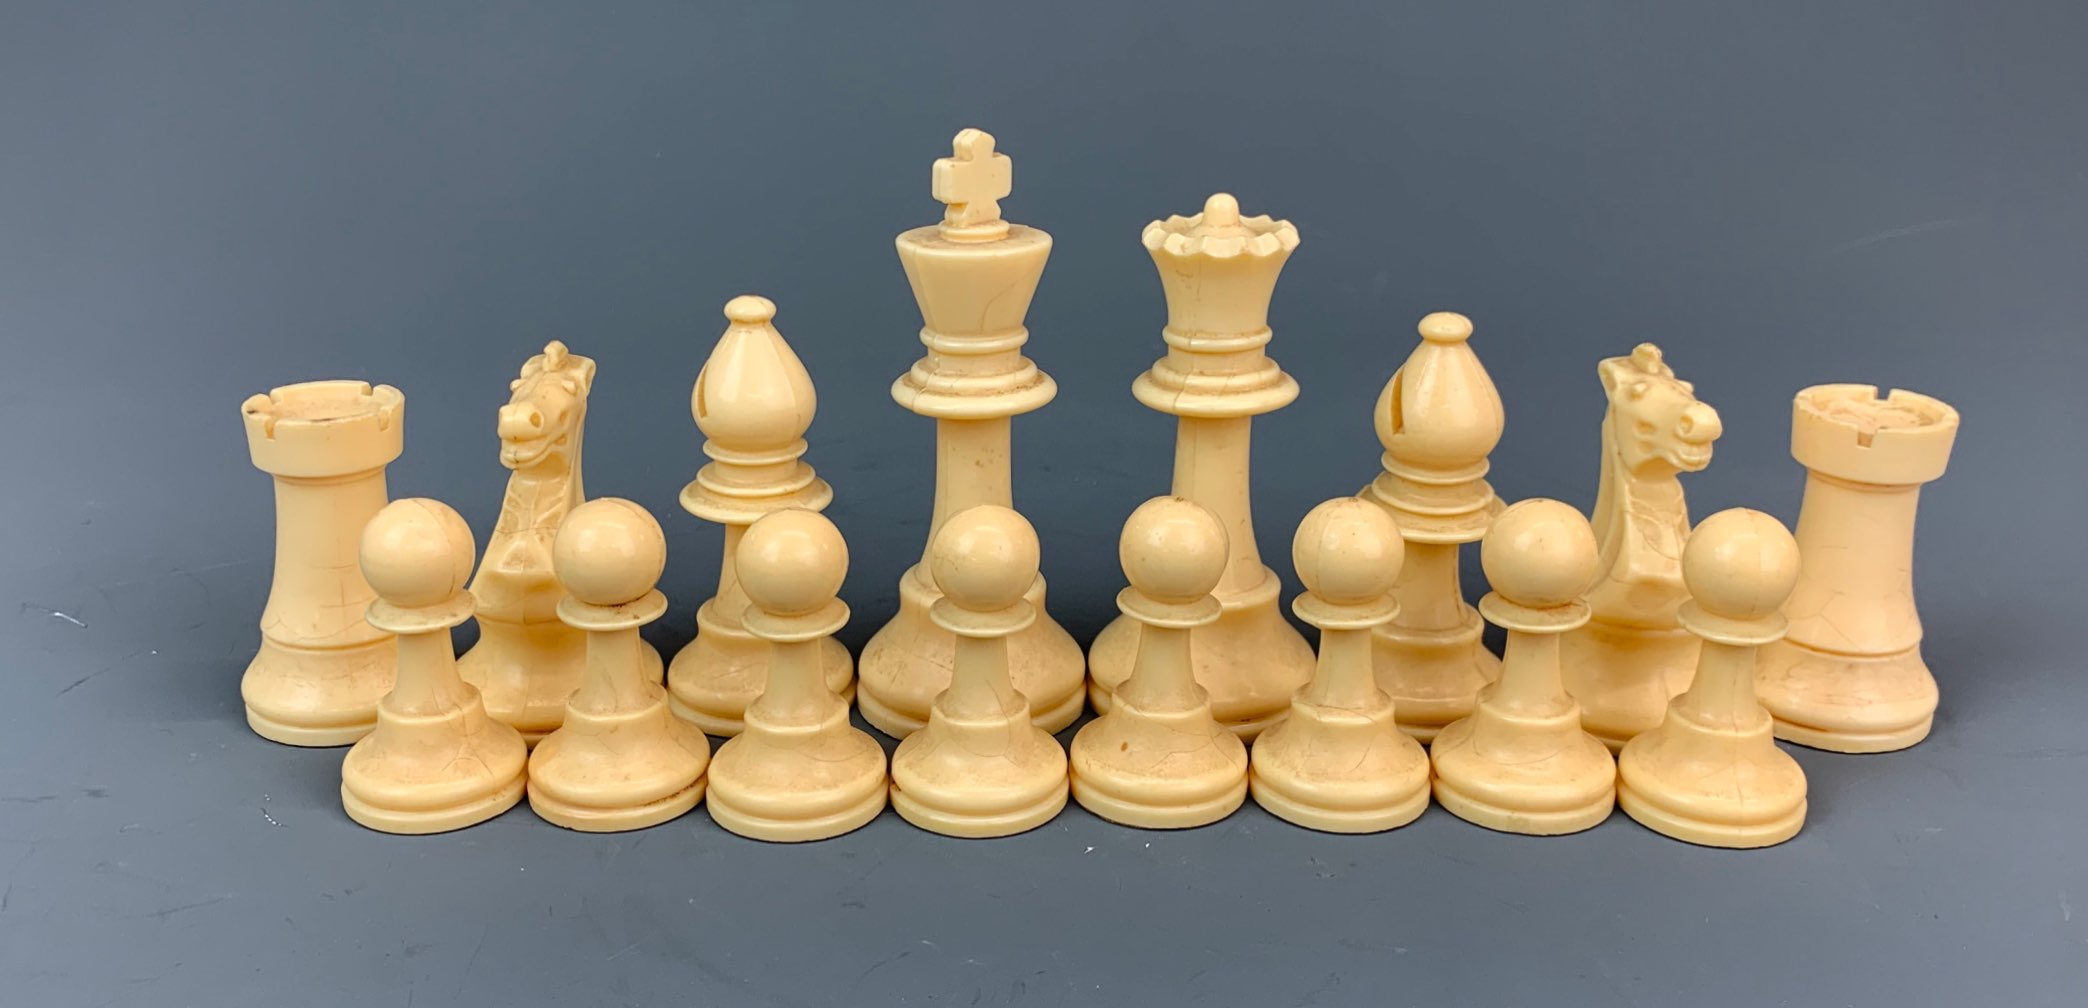 A vintage celluloid chess set with wooden board, king H. 9.5cm. - Image 2 of 6